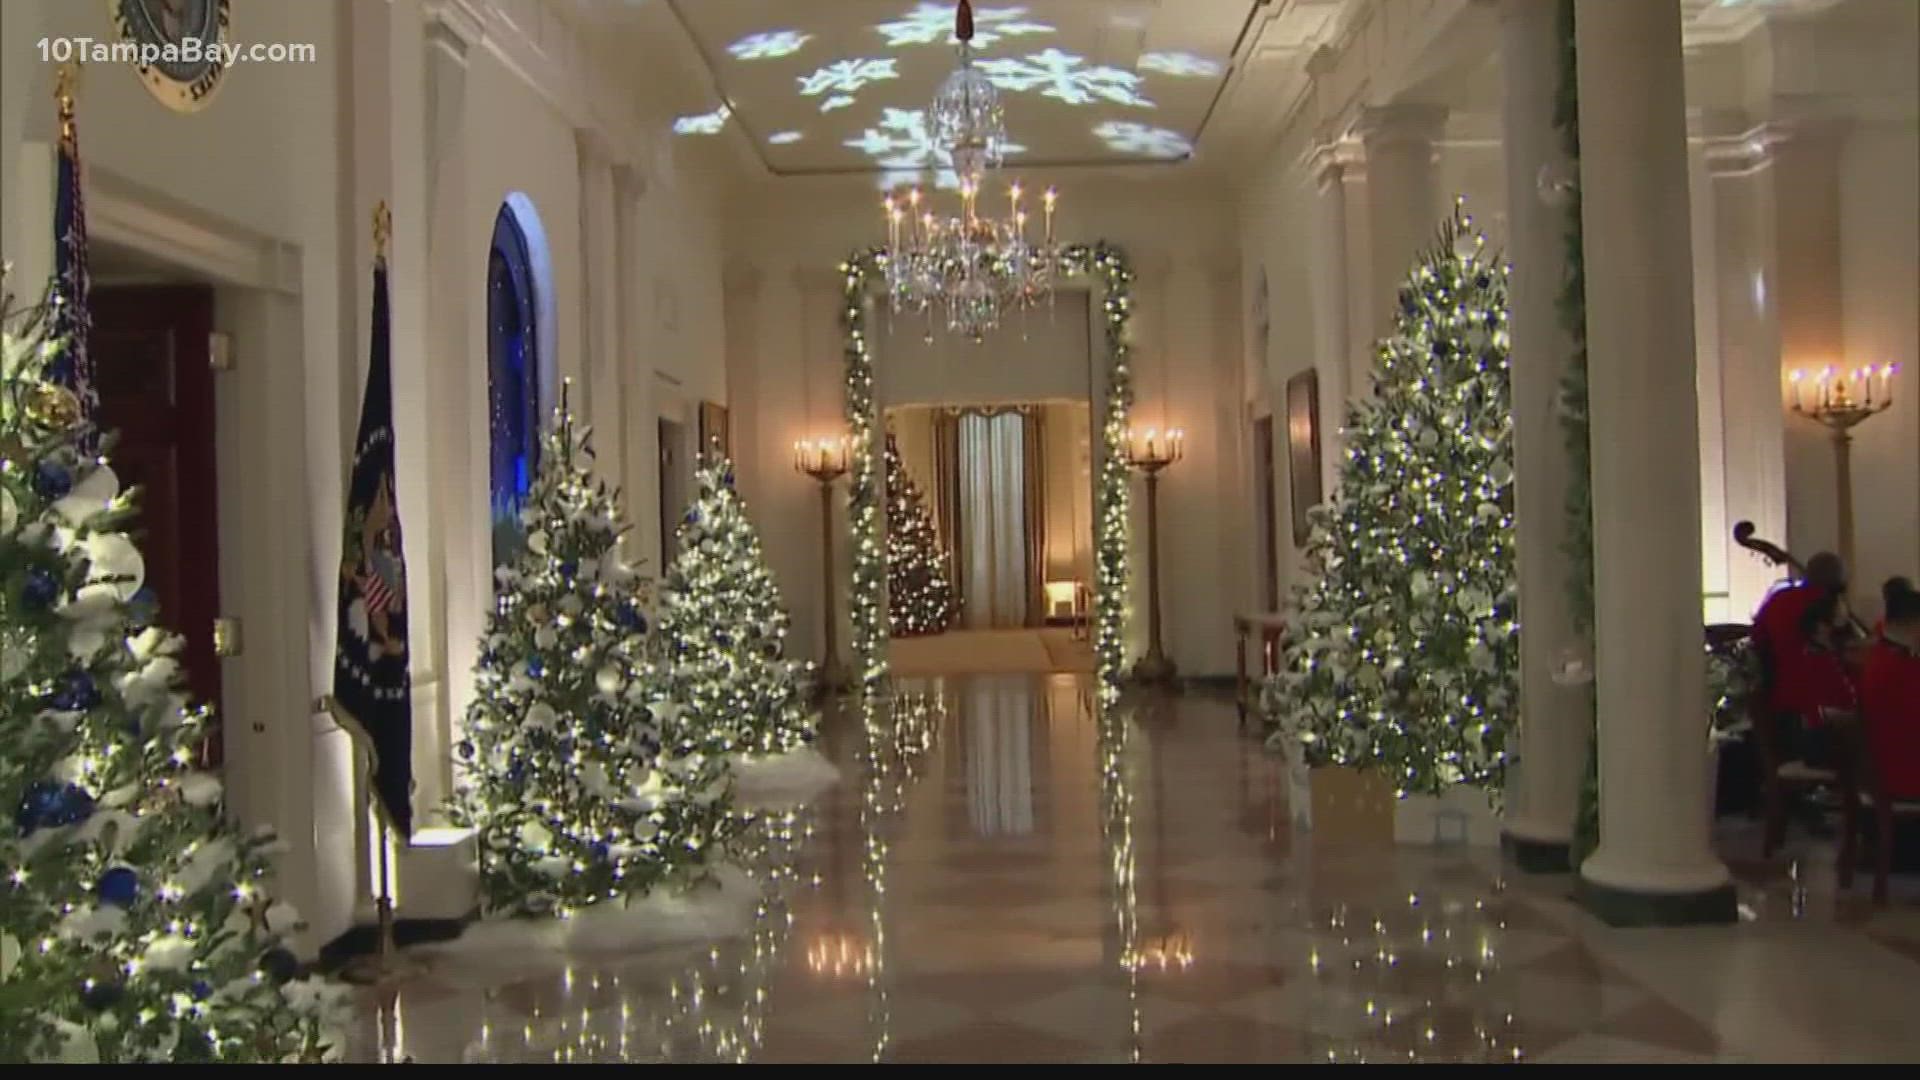 More than 100 volunteers decorated the White House with 41 Christmas trees, some 6,000 feet of ribbon and more than 10,000 ornaments.